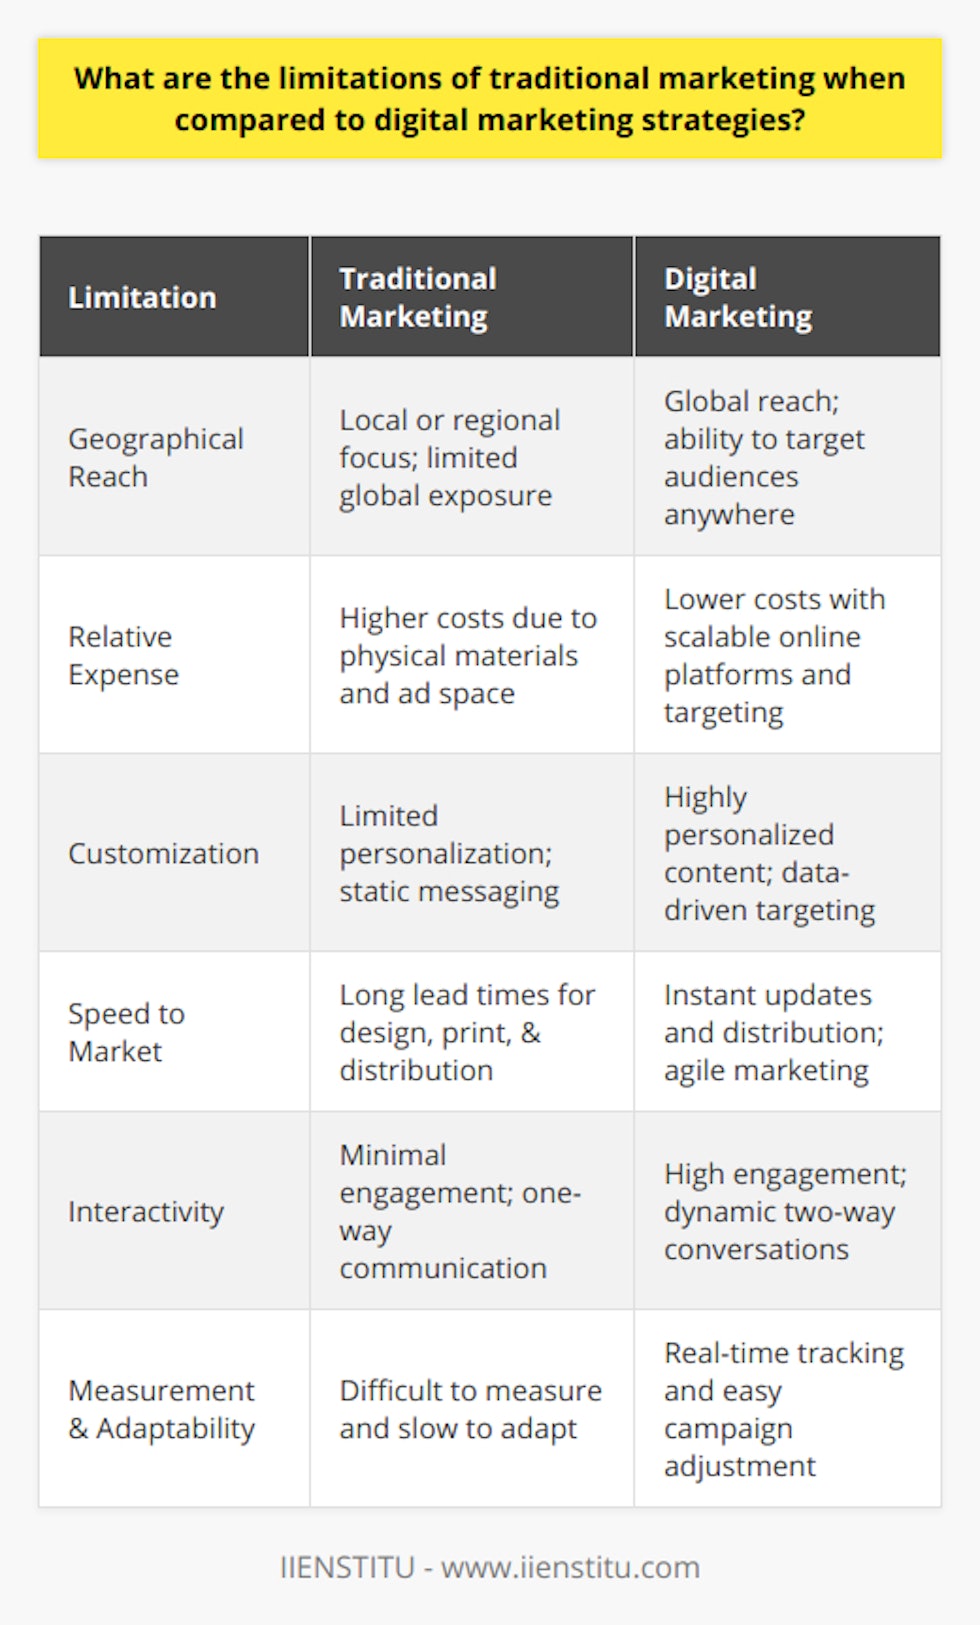 When examining the landscape of marketing, we notice that traditional marketing forms such as printed ads, billboards, and broadcast media are increasingly facing challenges in the wake of the digital revolution. Here are some key limitations that traditional marketing encounters compared to digital marketing strategies.**Geographical Limitations:**The scope of traditional marketing is typically confined. Advertisements that appear on television, in newspapers, or on the radio usually target a specific local or regional demographic. This inherent limitation can be a disadvantage for businesses aiming to expand their reach or connect with audiences beyond their immediate geographic area. In stark contrast, digital marketing knows no such bounds. The internet's global reach means a campaign launched from one corner of the world can be seen by consumers thousands of miles away.**Relative Expense:**Cost outlay represents one of the most significant constraints of traditional marketing. The expenditure associated with securing ad space in mainstream media or constructing a prominent billboard can be staggering. These costs can represent a substantial part of a company’s marketing budget, making it an inefficient choice for some. Digital marketing, while not necessarily cheap, generally demands a lower investment. Platforms such as social media, email, and search engine marketing often offer more affordable solutions with measurable results, allowing for better cost management and ROI analysis.**Customization Challenges:**In traditional marketing avenues, personalization is limited. A print ad, for instance, is static and must cater to a wide audience rather than individual preferences. Digital marketing thrives on customization, with algorithms and data analytics enabling marketers to target specific demographics, interests, and shopping behaviors. This personal touch elicits stronger engagement from consumers, as messages can be tailored to their needs and desires.**Speed to Market:**The lead time involved in traditional marketing can be cumbersome. Designing, printing, and distributing physical marketing materials takes considerable time. Moreover, should there be a need to change the strategy, the process to modify these materials is prolonged. The agility of digital marketing allows for near-instantaneous changes. With a few clicks, ads and content can be updated and shared in real time, making it possible to react quickly to market trends.**Interactivity Limitation:**Traditional marketing is largely one-directional, where the audience is a passive recipient of the message. Opportunities for consumers to interact or engage directly with traditional forms of marketing are minimal. Conversely, digital marketing thrives on interactivity. Social media, for example, enables consumers to comment on, like, and share content, while websites can offer live chats and immediate feedback options, creating a dynamic, two-way conversation.**Measurement and Adaptability Challenges:**Quantifying the success of traditional marketing campaigns is notoriously difficult. Metrics are often vague or delayed, which makes it a challenge to determine the efficacy of a campaign and to justify marketing expenditures. Digital marketing provides a wealth of data that can be tracked and analyzed almost immediately. This allows for on-the-fly adaptability and optimization, with marketers being able to tweak campaigns based on real-time performance data.In summary, while traditional marketing holds its own significance in the historical and current marketing mix, it is apparent that it is limited by its reach, cost, personalization capabilities, speed, interactivity, and measurability. As businesses continue to seek better engagement, targeting, and efficiency, digital marketing strategies, which excel in these areas, present themselves as increasingly attractive alternatives. Despite these differences, a blended strategy incorporating the strengths of both traditional and digital marketing can often yield the most comprehensive results.